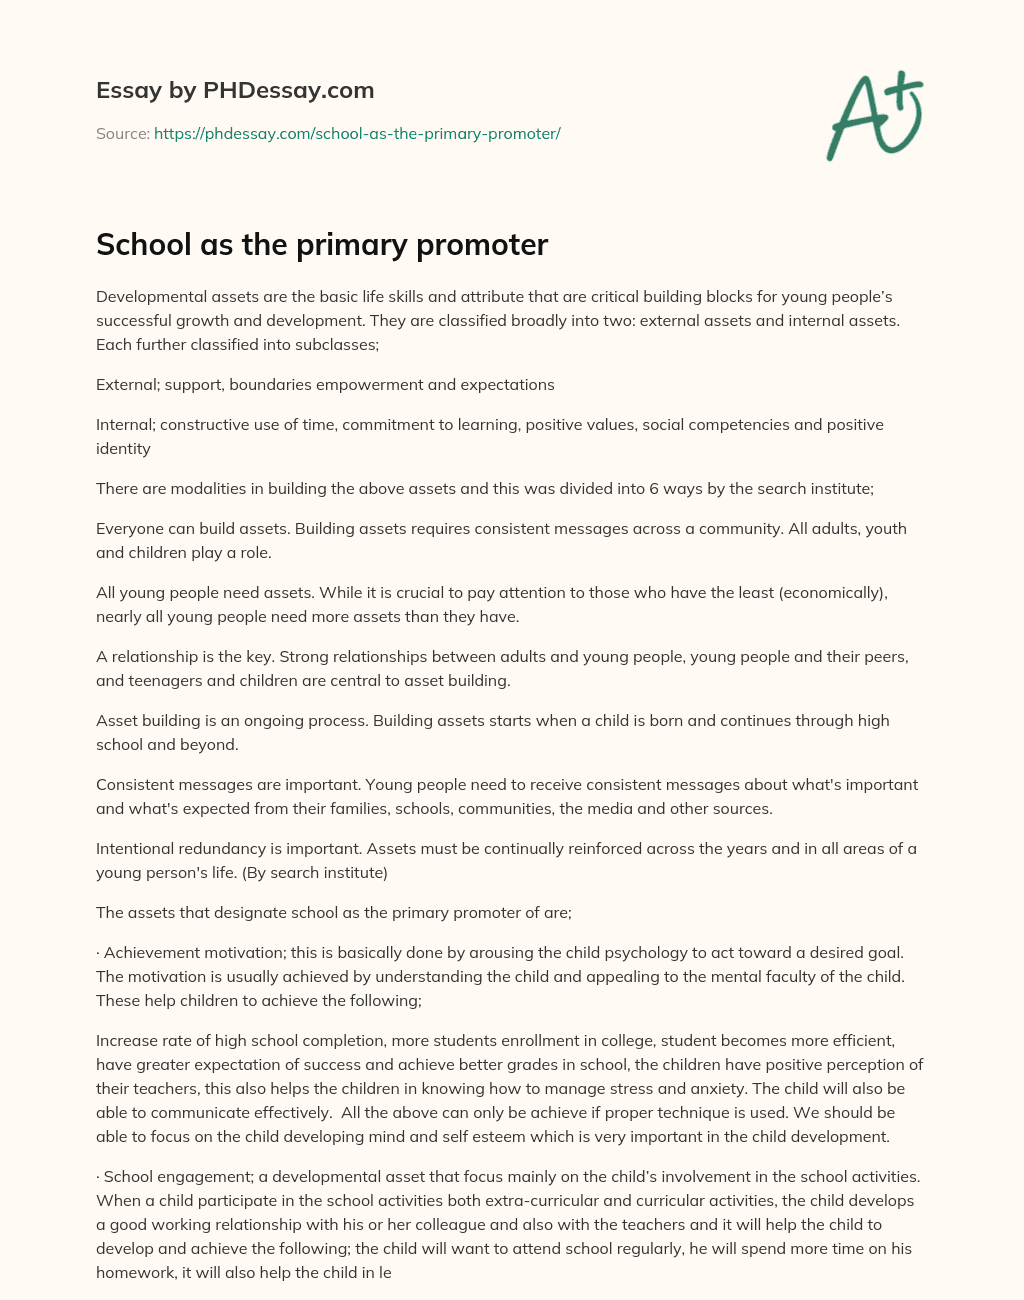 School as the primary promoter essay